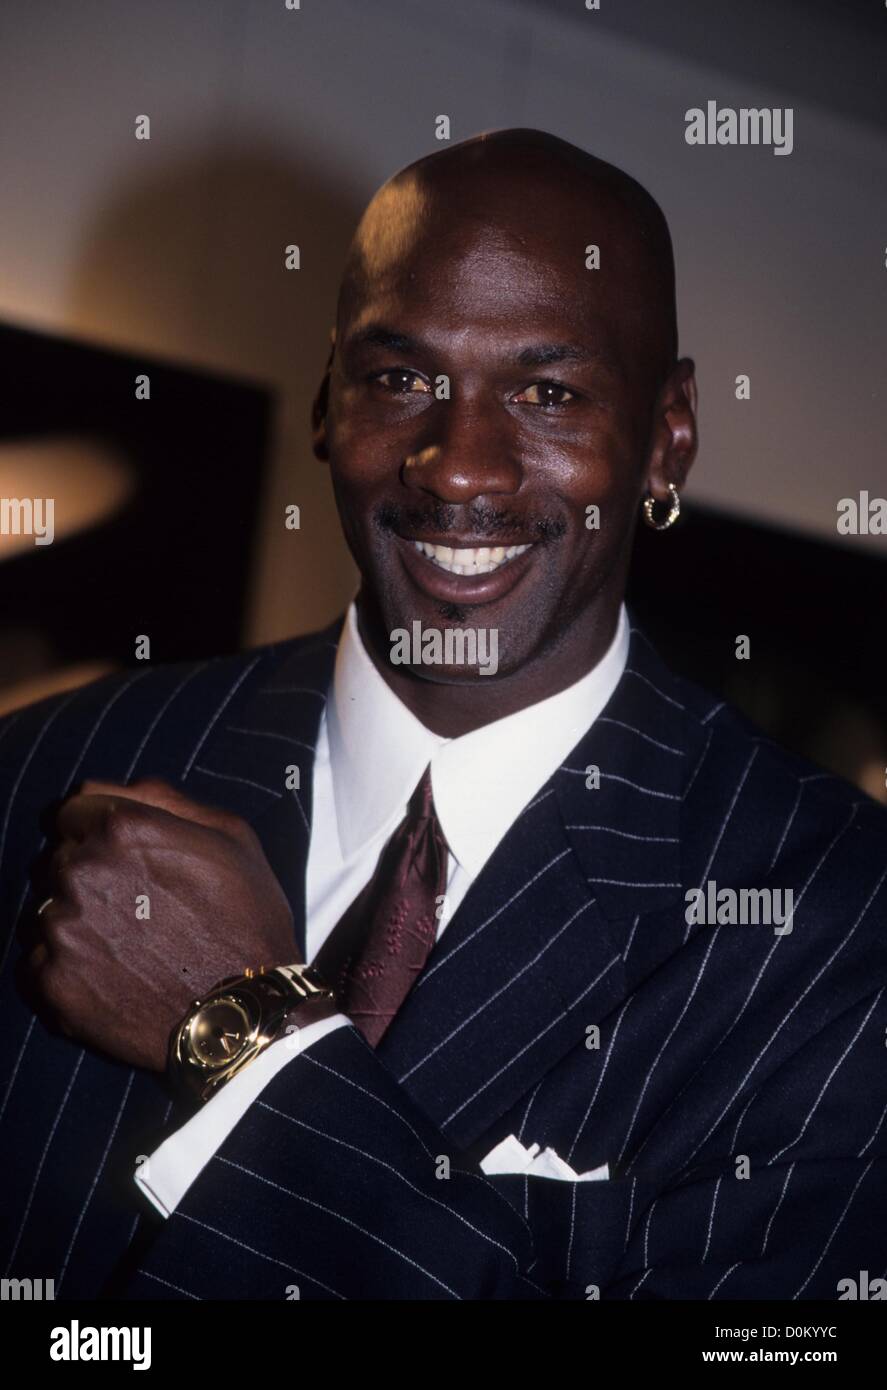 MICHAEL JORDAN received a special Gold edition of Oakley Time Bomb